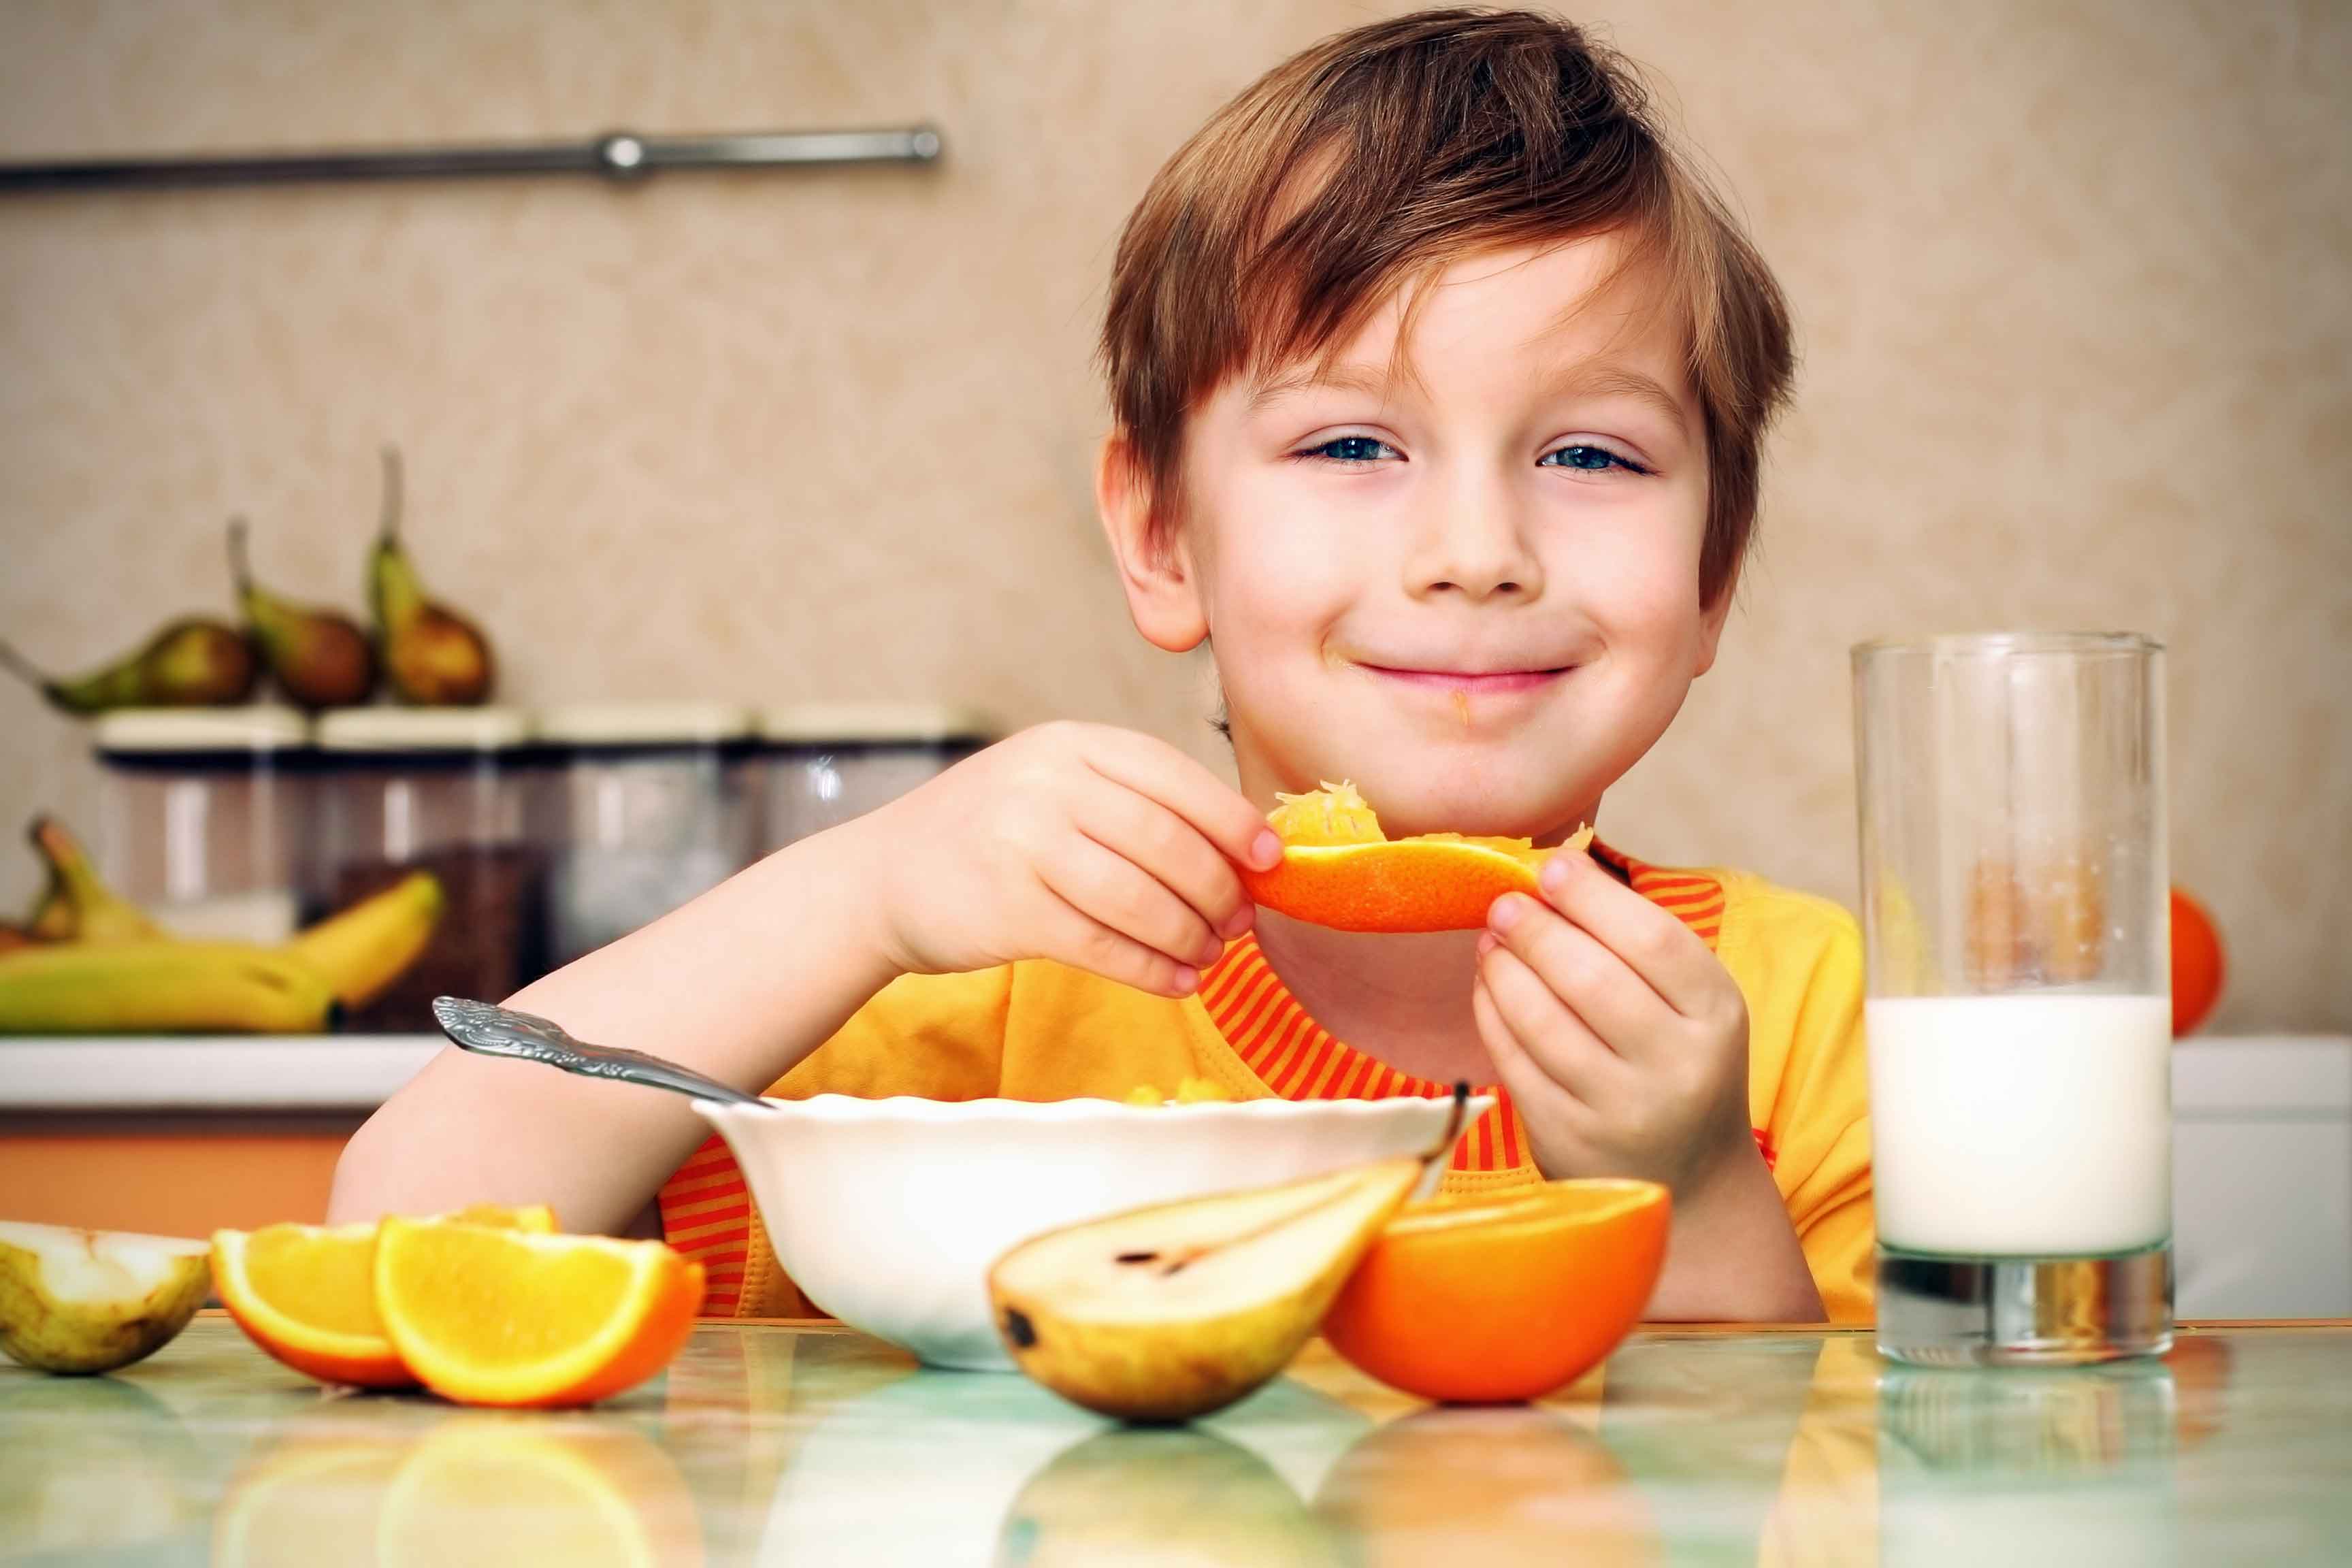 Holford Direct » KID'S NUTRITION PART 1: THE TRUTH ABOUT CARBS